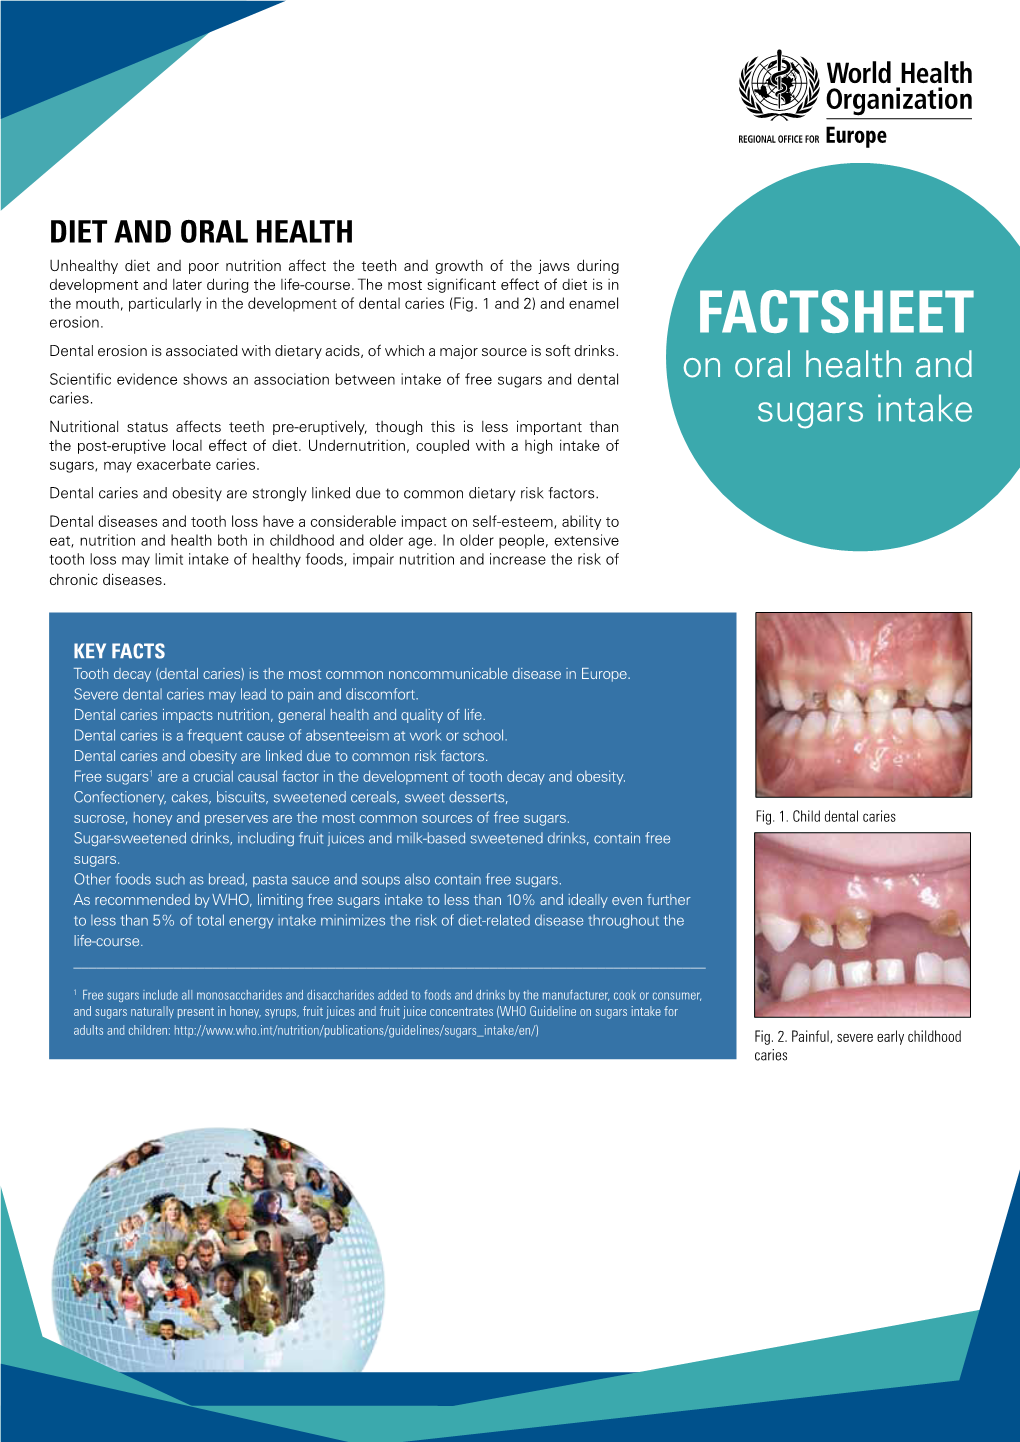 Diet and Oral Health: Factsheet on Oral Health and Sugars